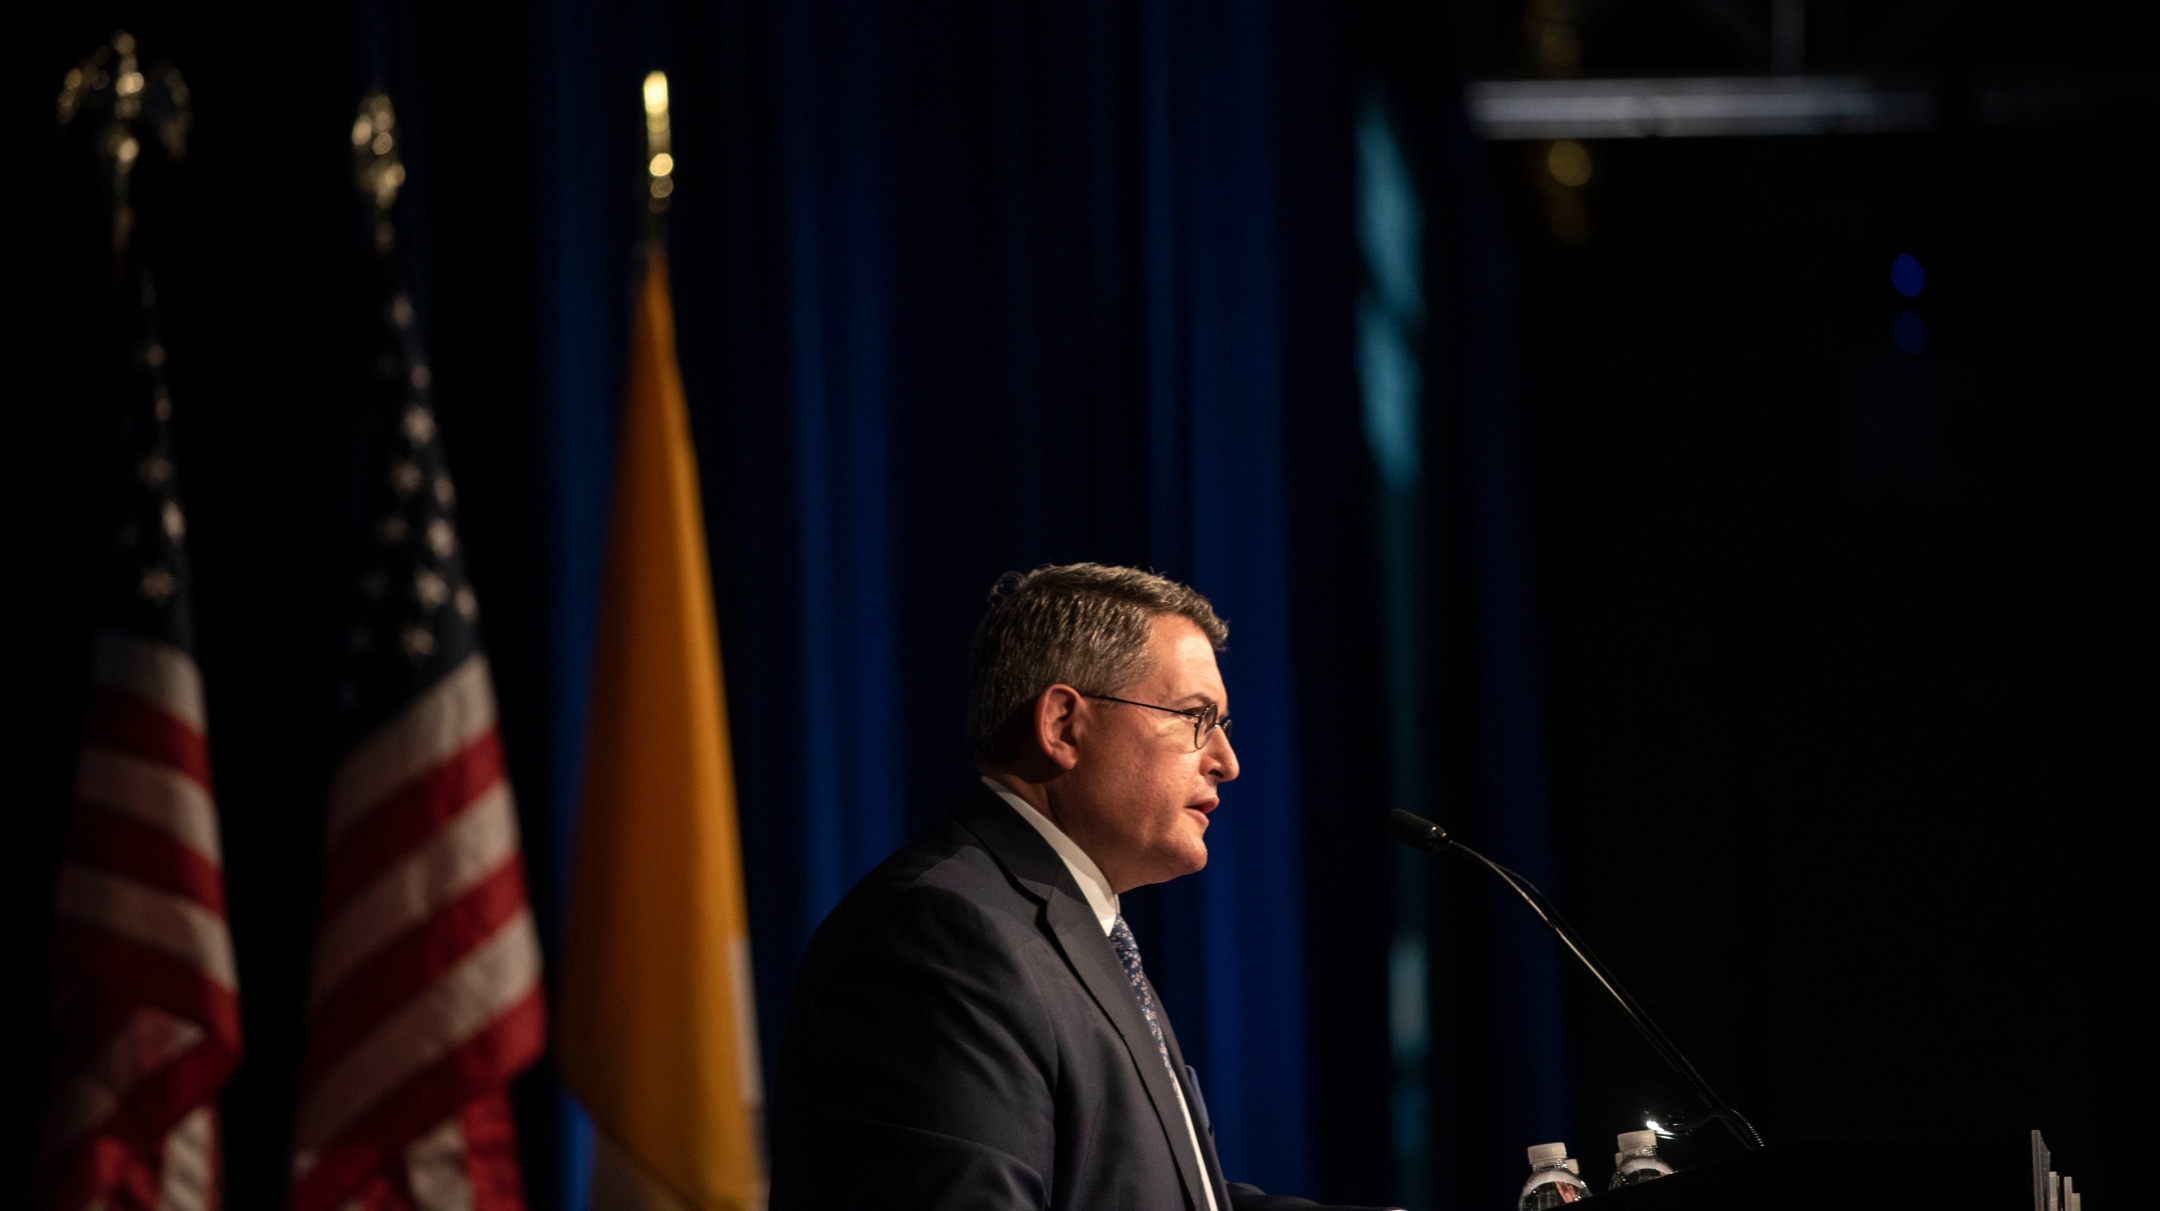 Leonard Leo speaks at the National Catholic Prayer Breakfast in Washington, D.C., April 23, 2019. Leo heads the Marble Freedom Trust, to which Barre Seid donated $1.6 billion. (Michael Robinson Chavez/The Washington Post via Getty Images)